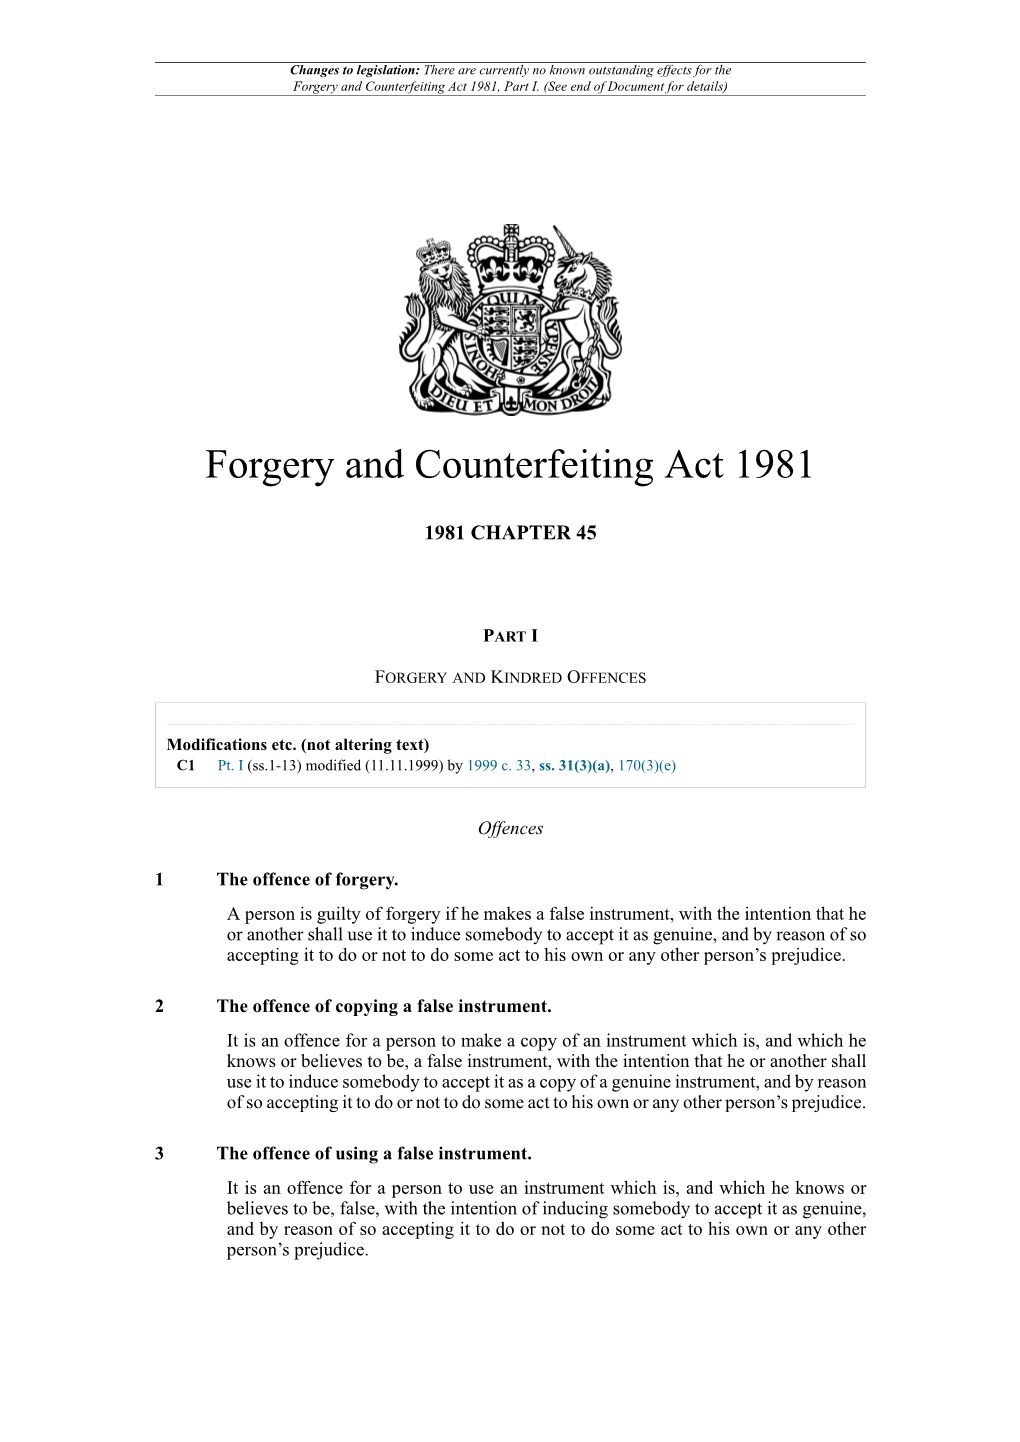 Forgery and Counterfeiting Act 1981, Part I